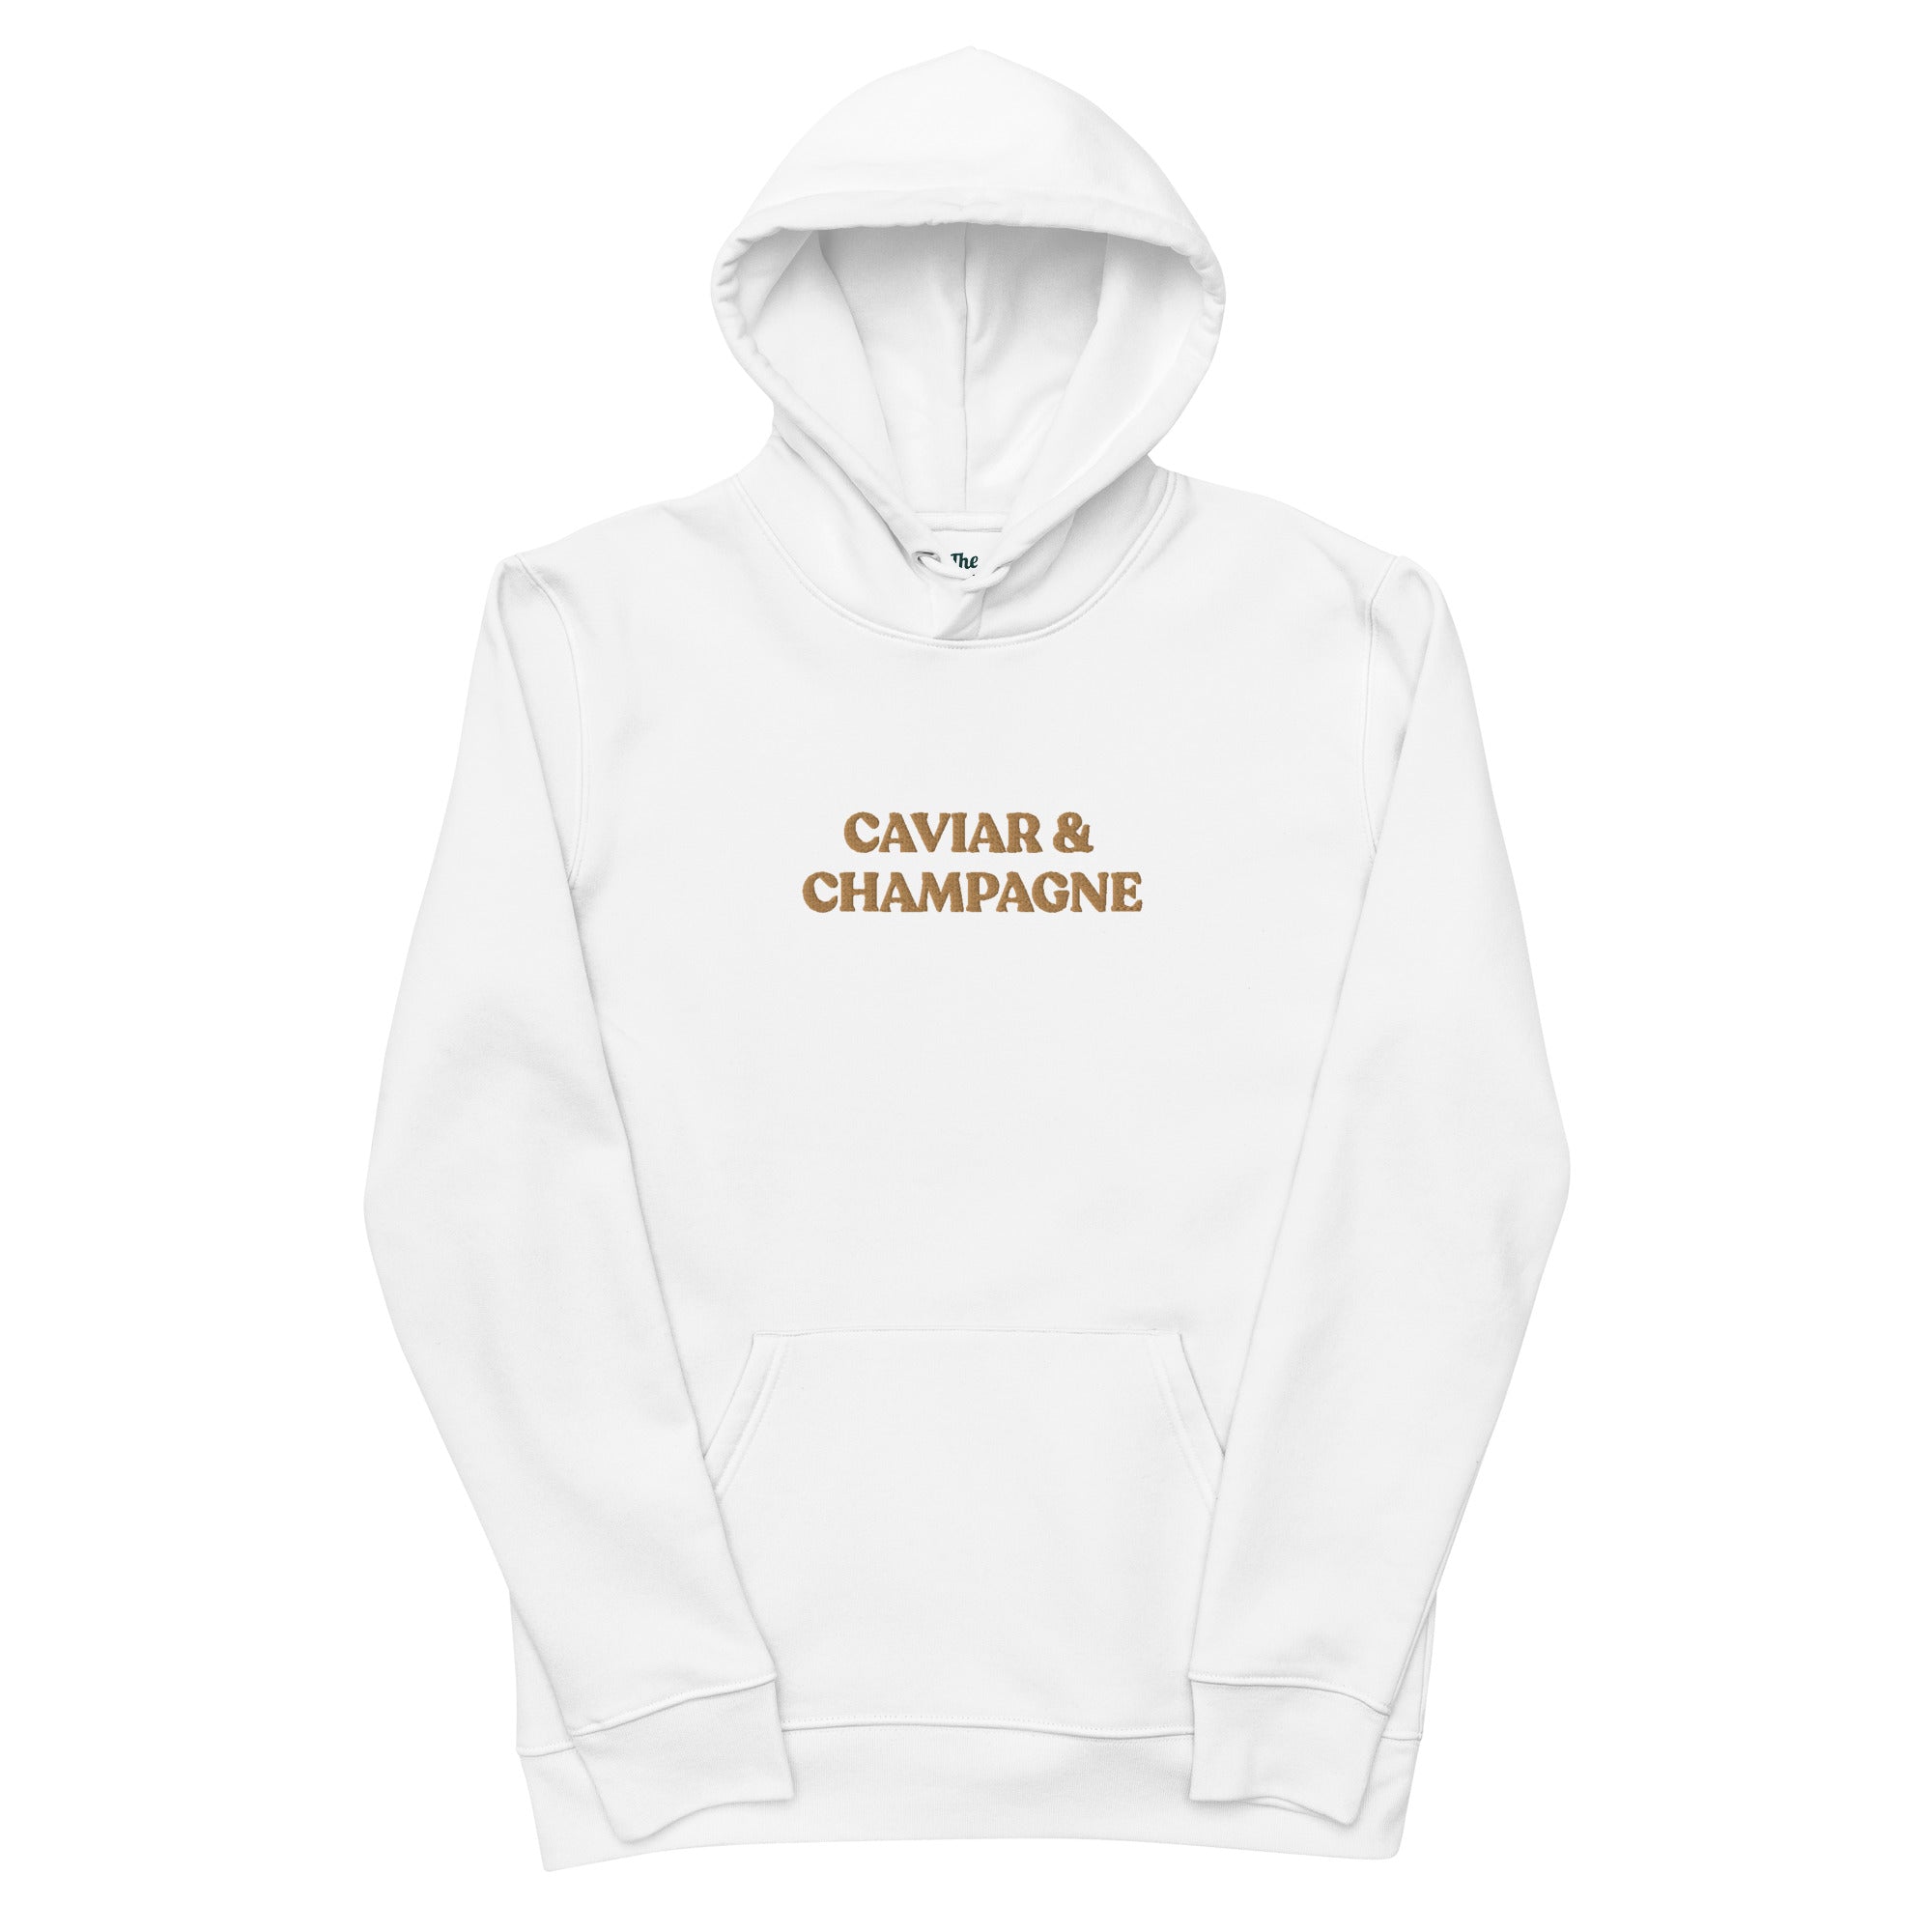 Caviar & Champagne - Organic Embroidered Hoodie - The Refined Spirit